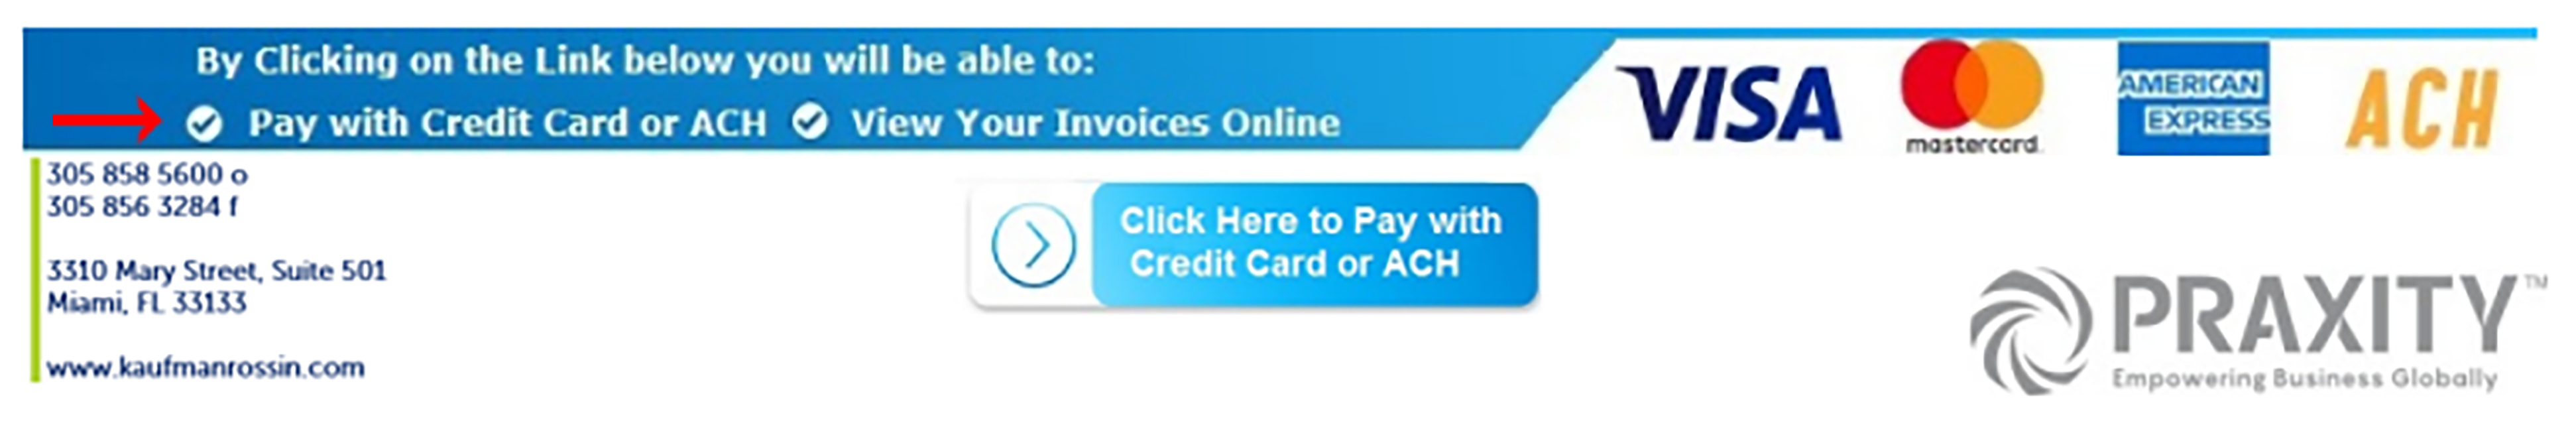 image of credit card ACH payment screen in Kaufman Rossin portal